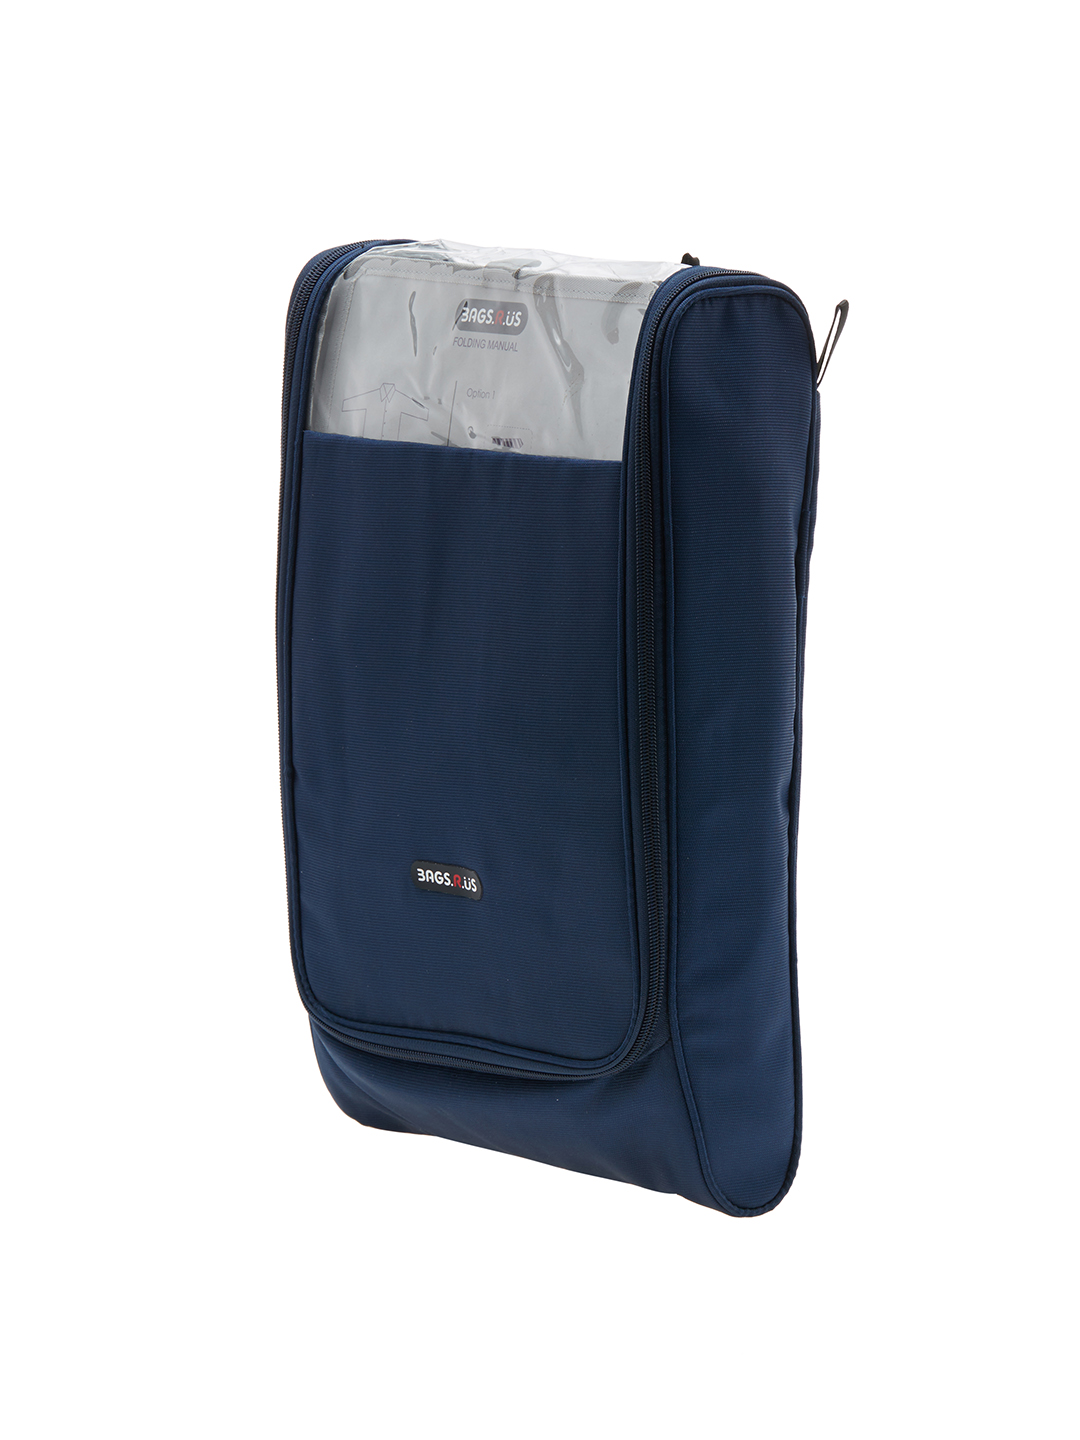 BagsRUs Navy Blue Polyester Zipper Packing Shirt Cover with Free Folding Board (SR106FNB)